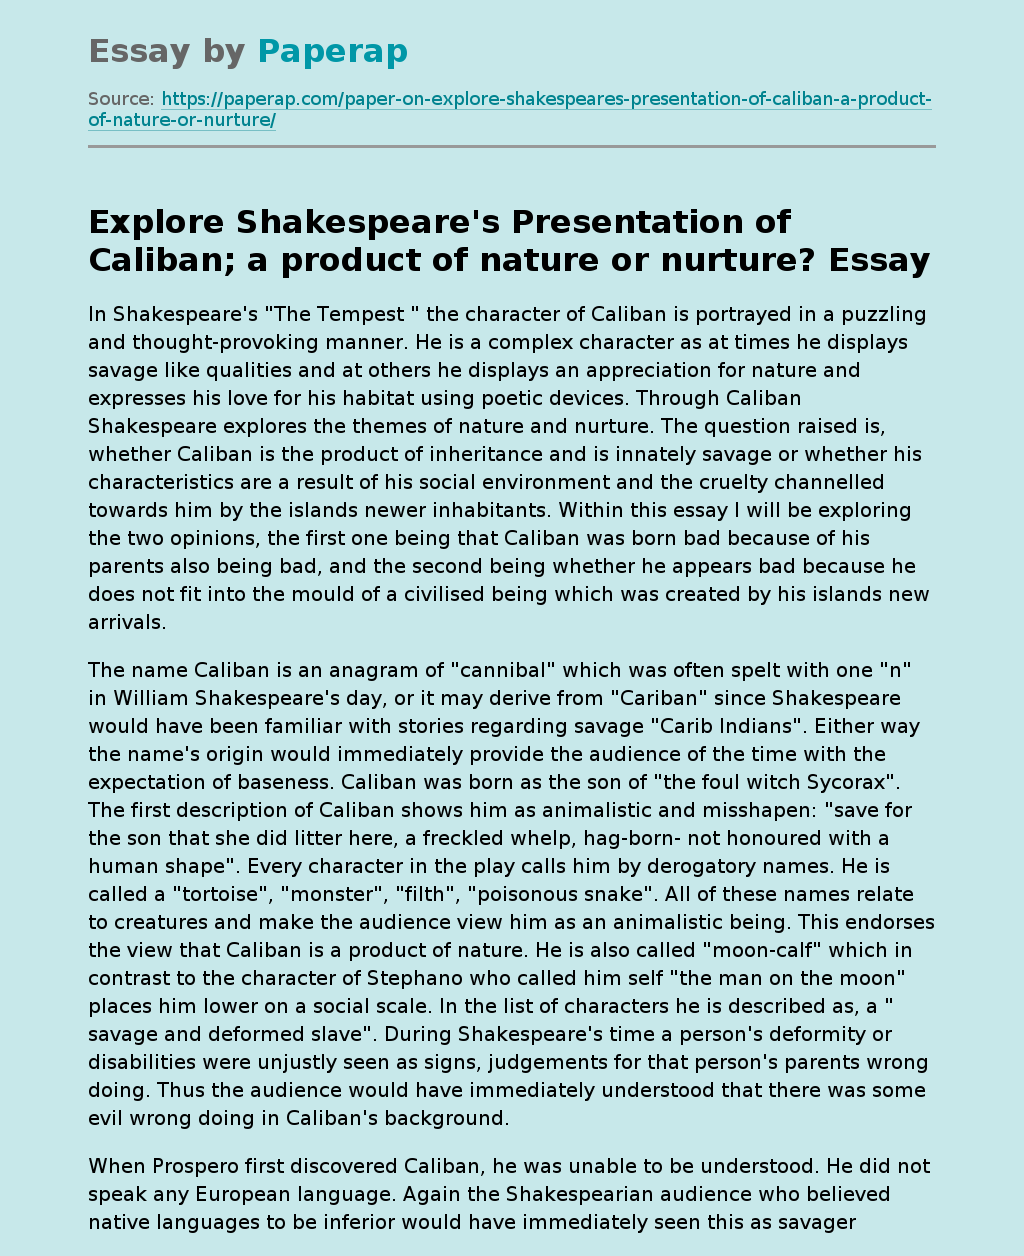 Explore Shakespeare's Presentation of Caliban; a product of nature or nurture?